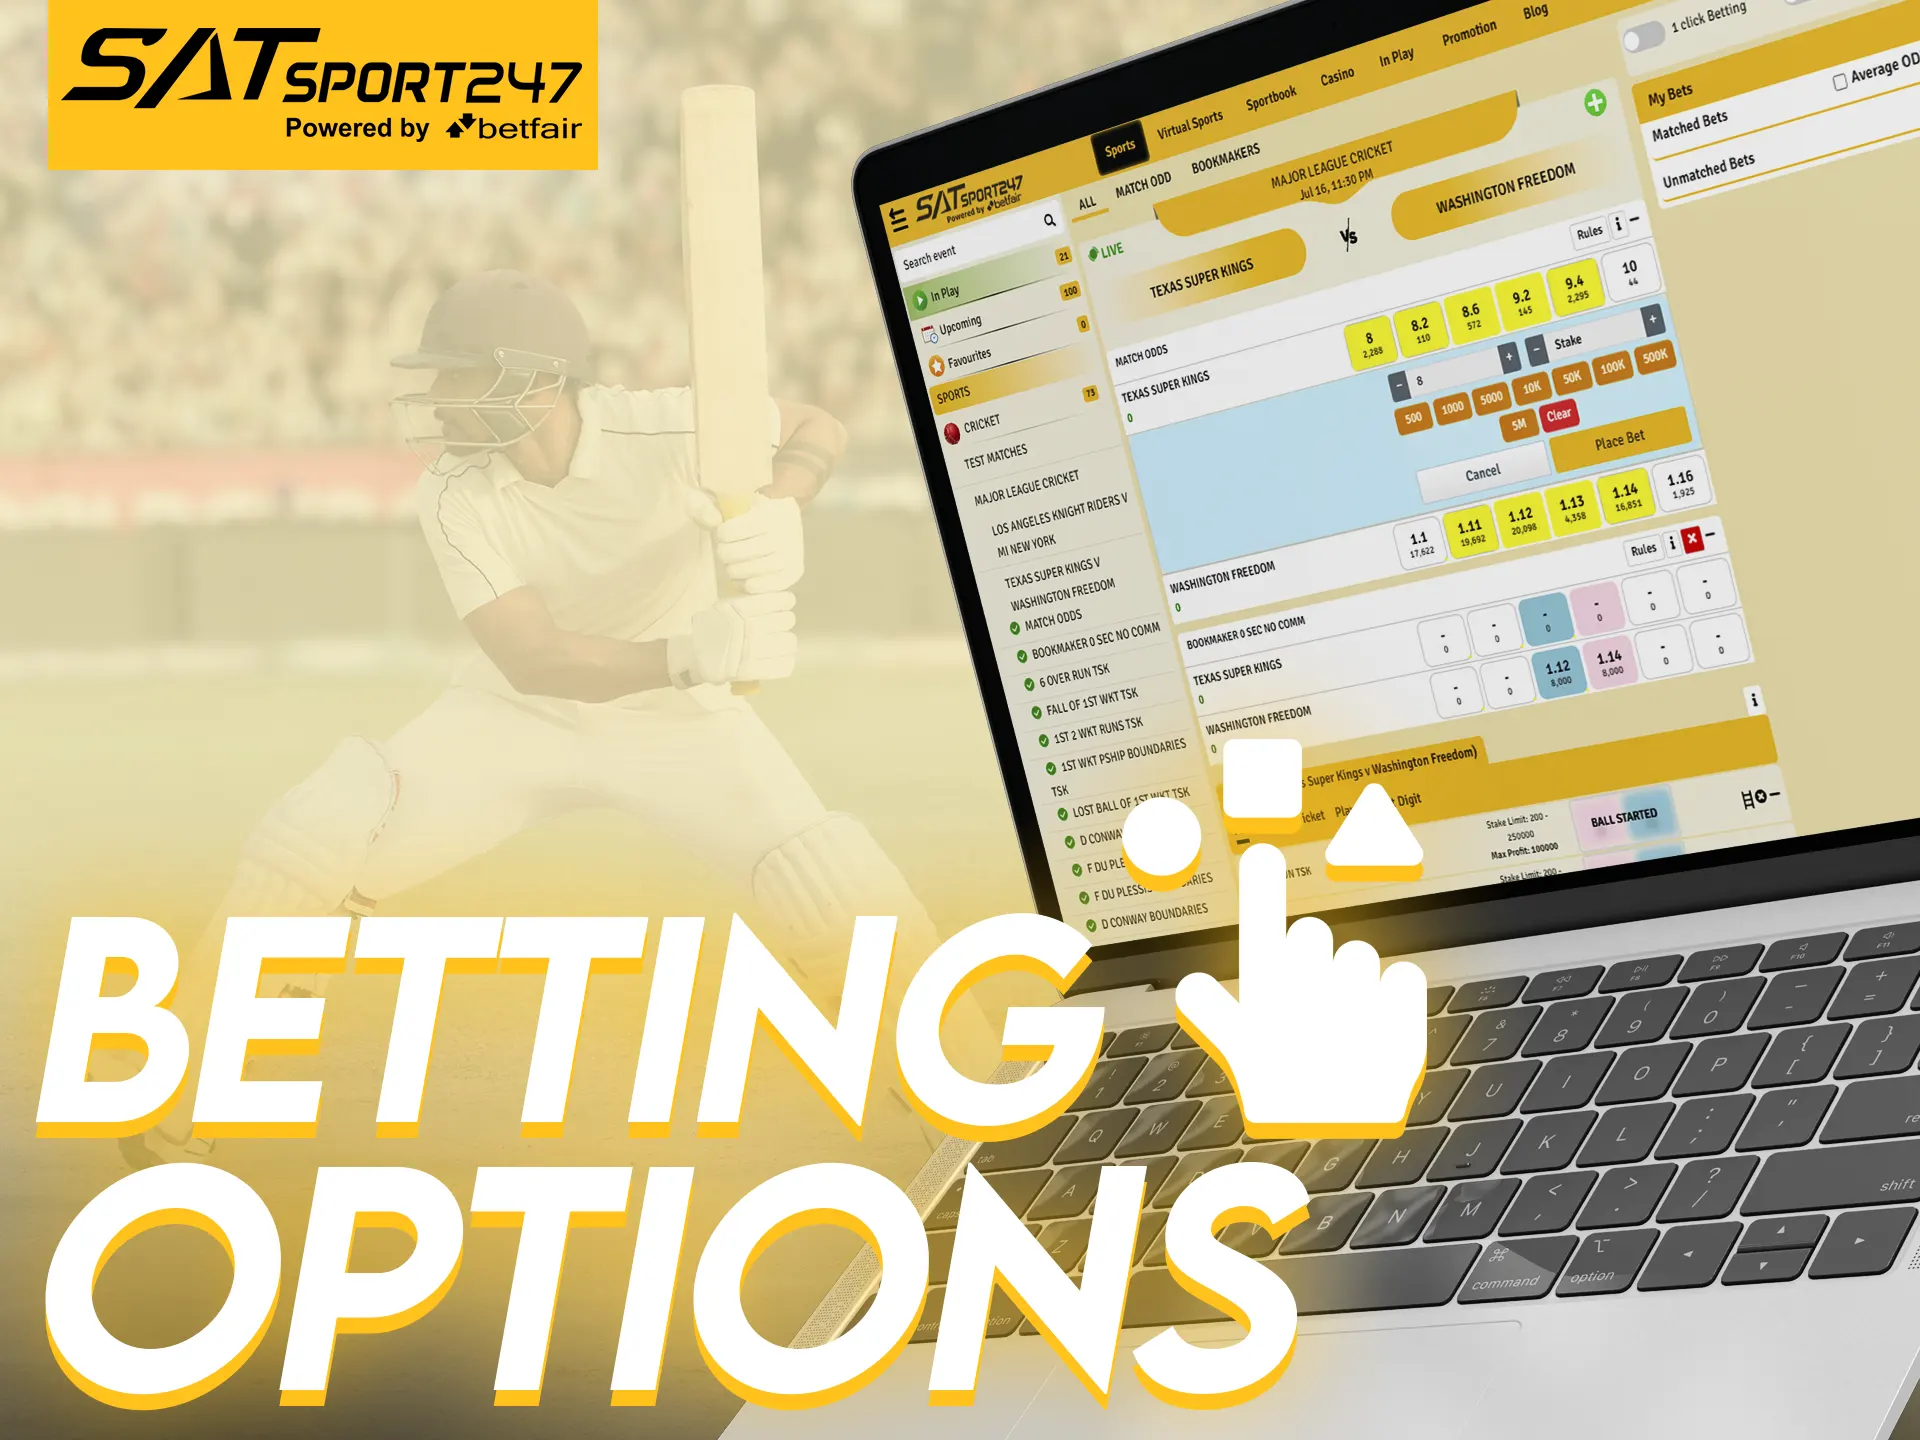 Try the different options for sports betting at Satsport247.